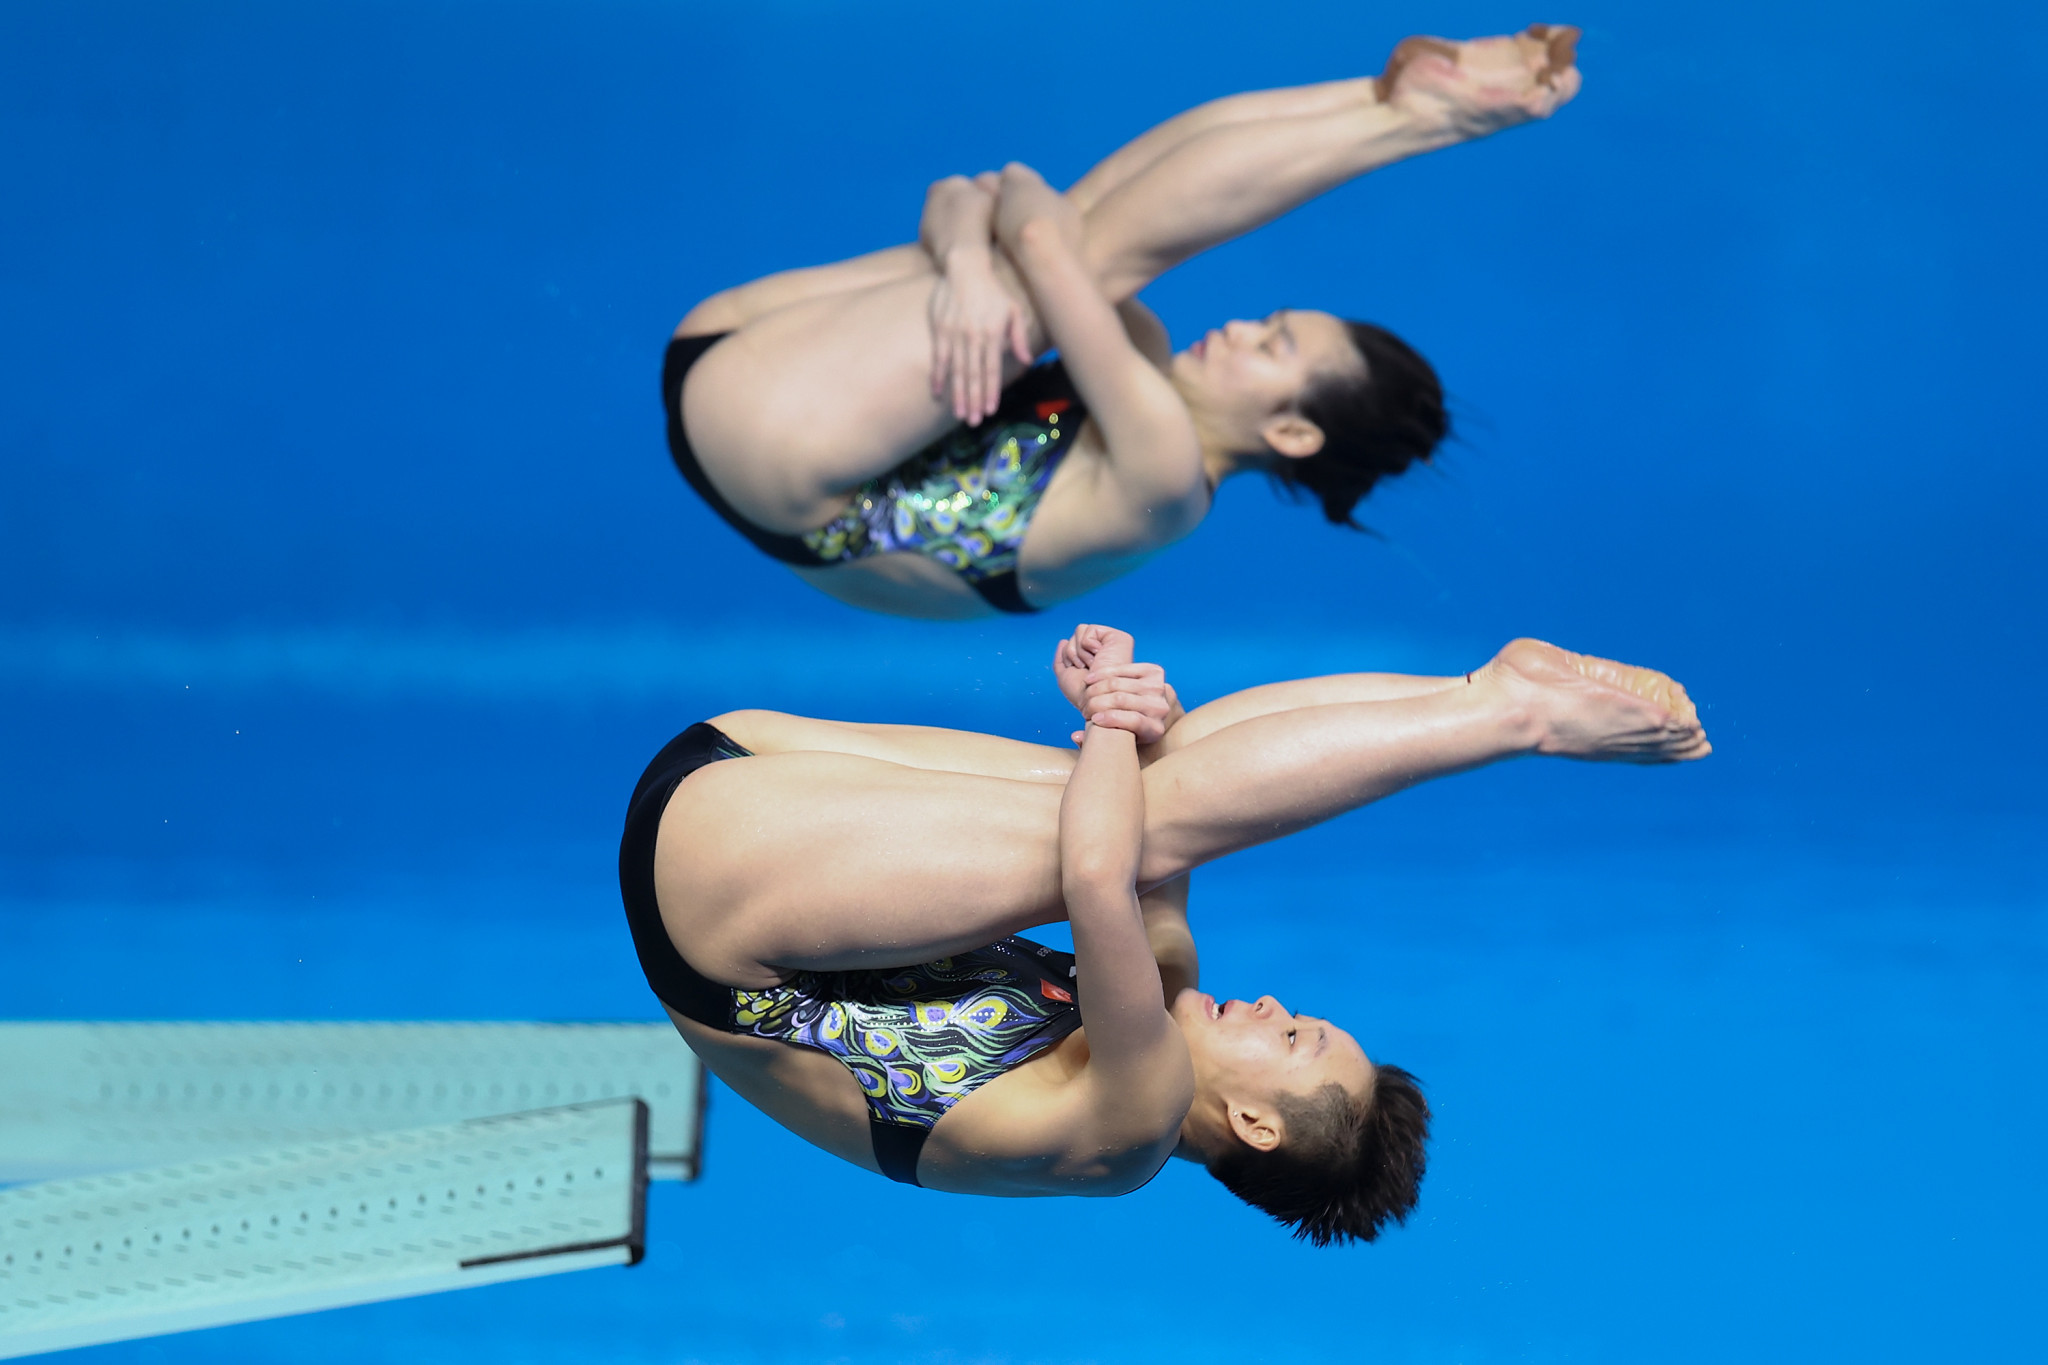 Tokyo to stage rescheduled Olympic diving qualifier in "very strict bubble"